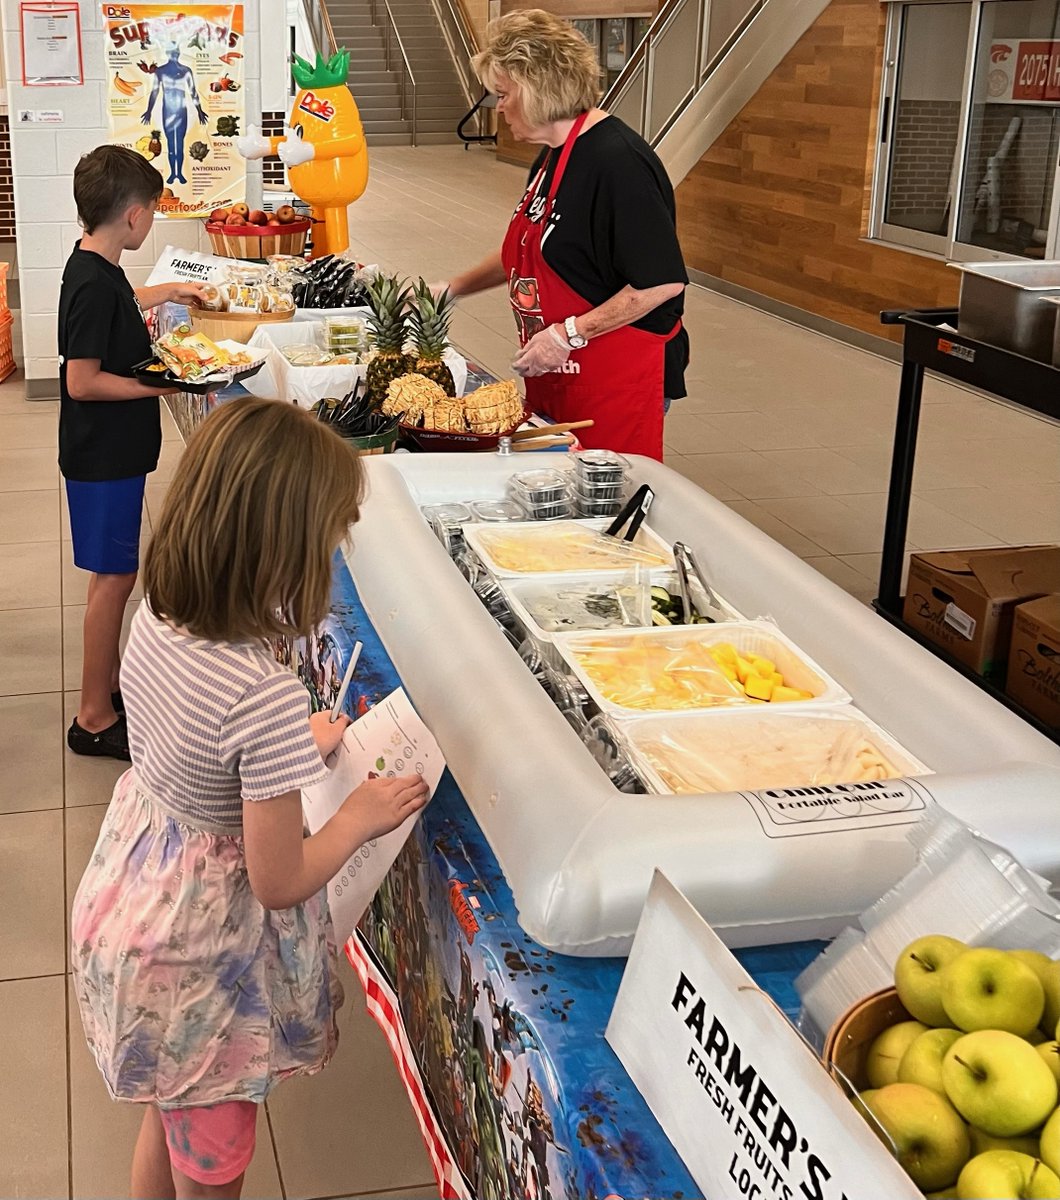 Students enjoyed a tasty journey at the Farmer's Market Fresh Produce Tasting hosted by Hardees Fresh Produce. From crisp apples to tropical pineapple, they sampled a variety of flavors and shared feedback for upcoming menus. Excitement builds for more culinary adventures ahead!